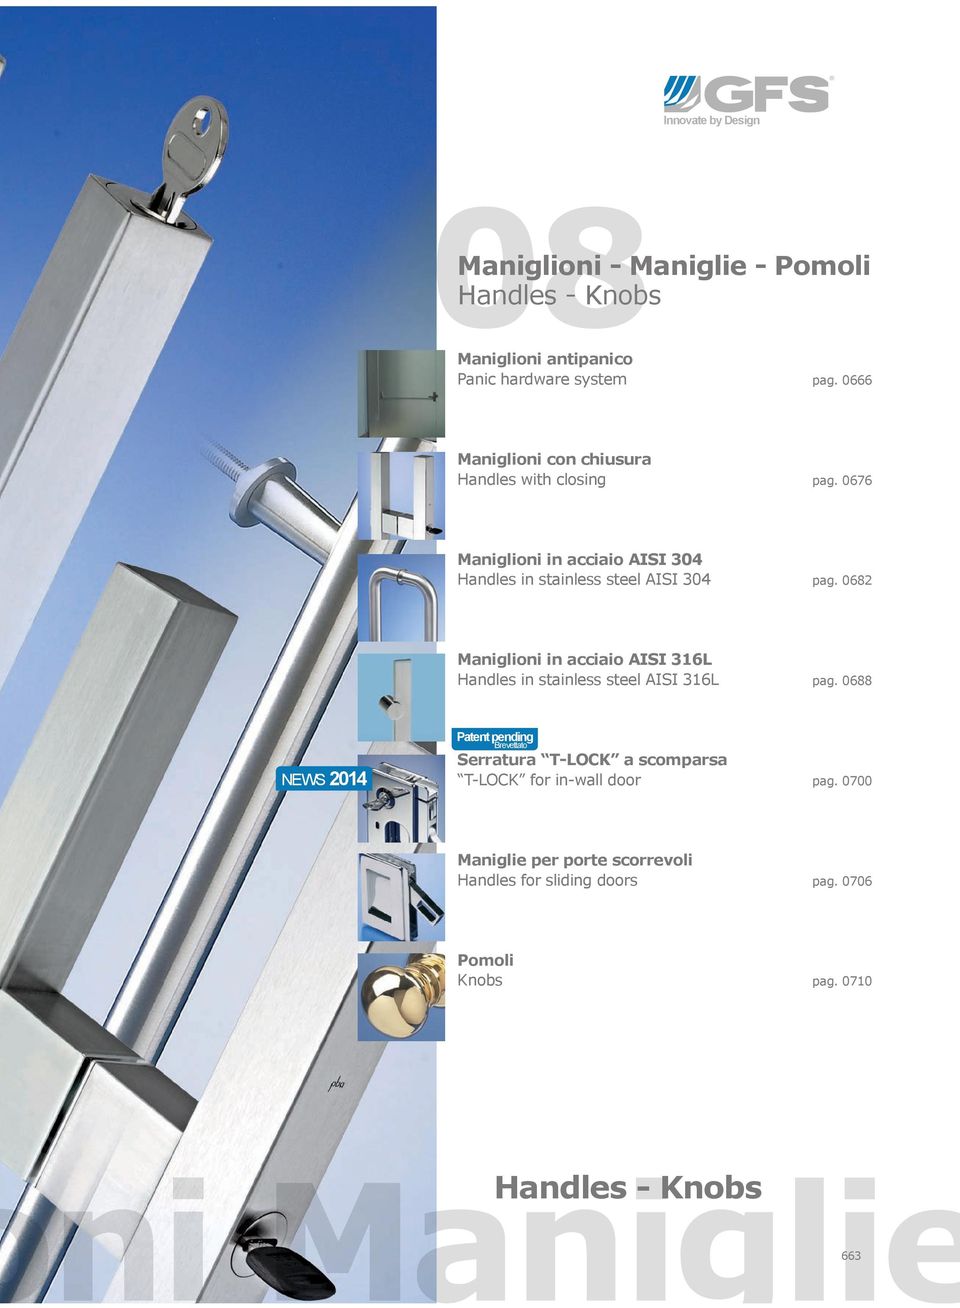 0682 Maniglioni in acciaio AISI 316L Handles in stainless steel AISI 316L pag.